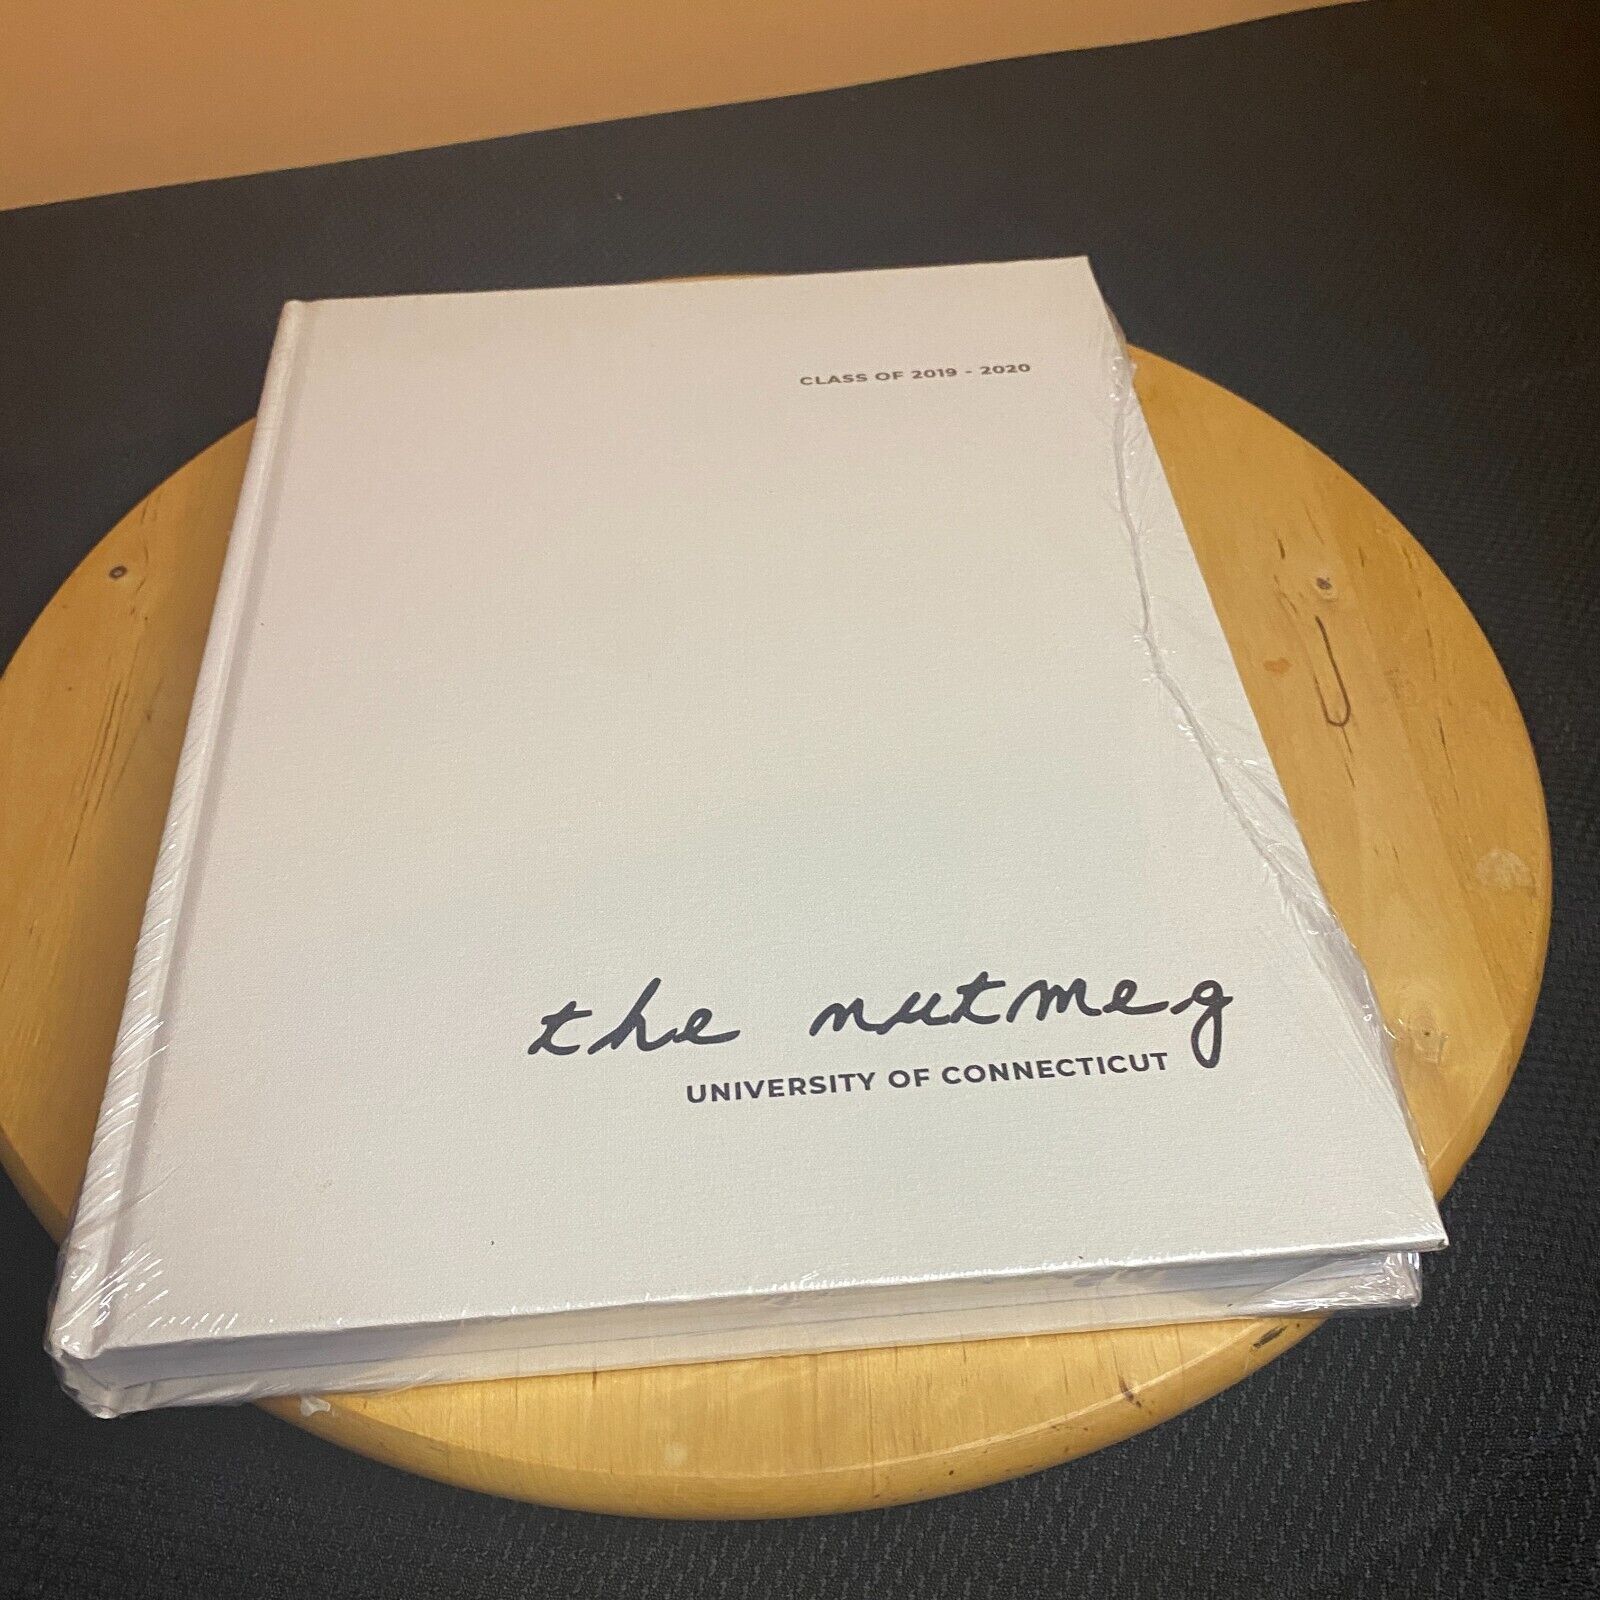 University Of Connecticut UConn Yearbook Class of 2019-2020 The Nutmeg Sealed